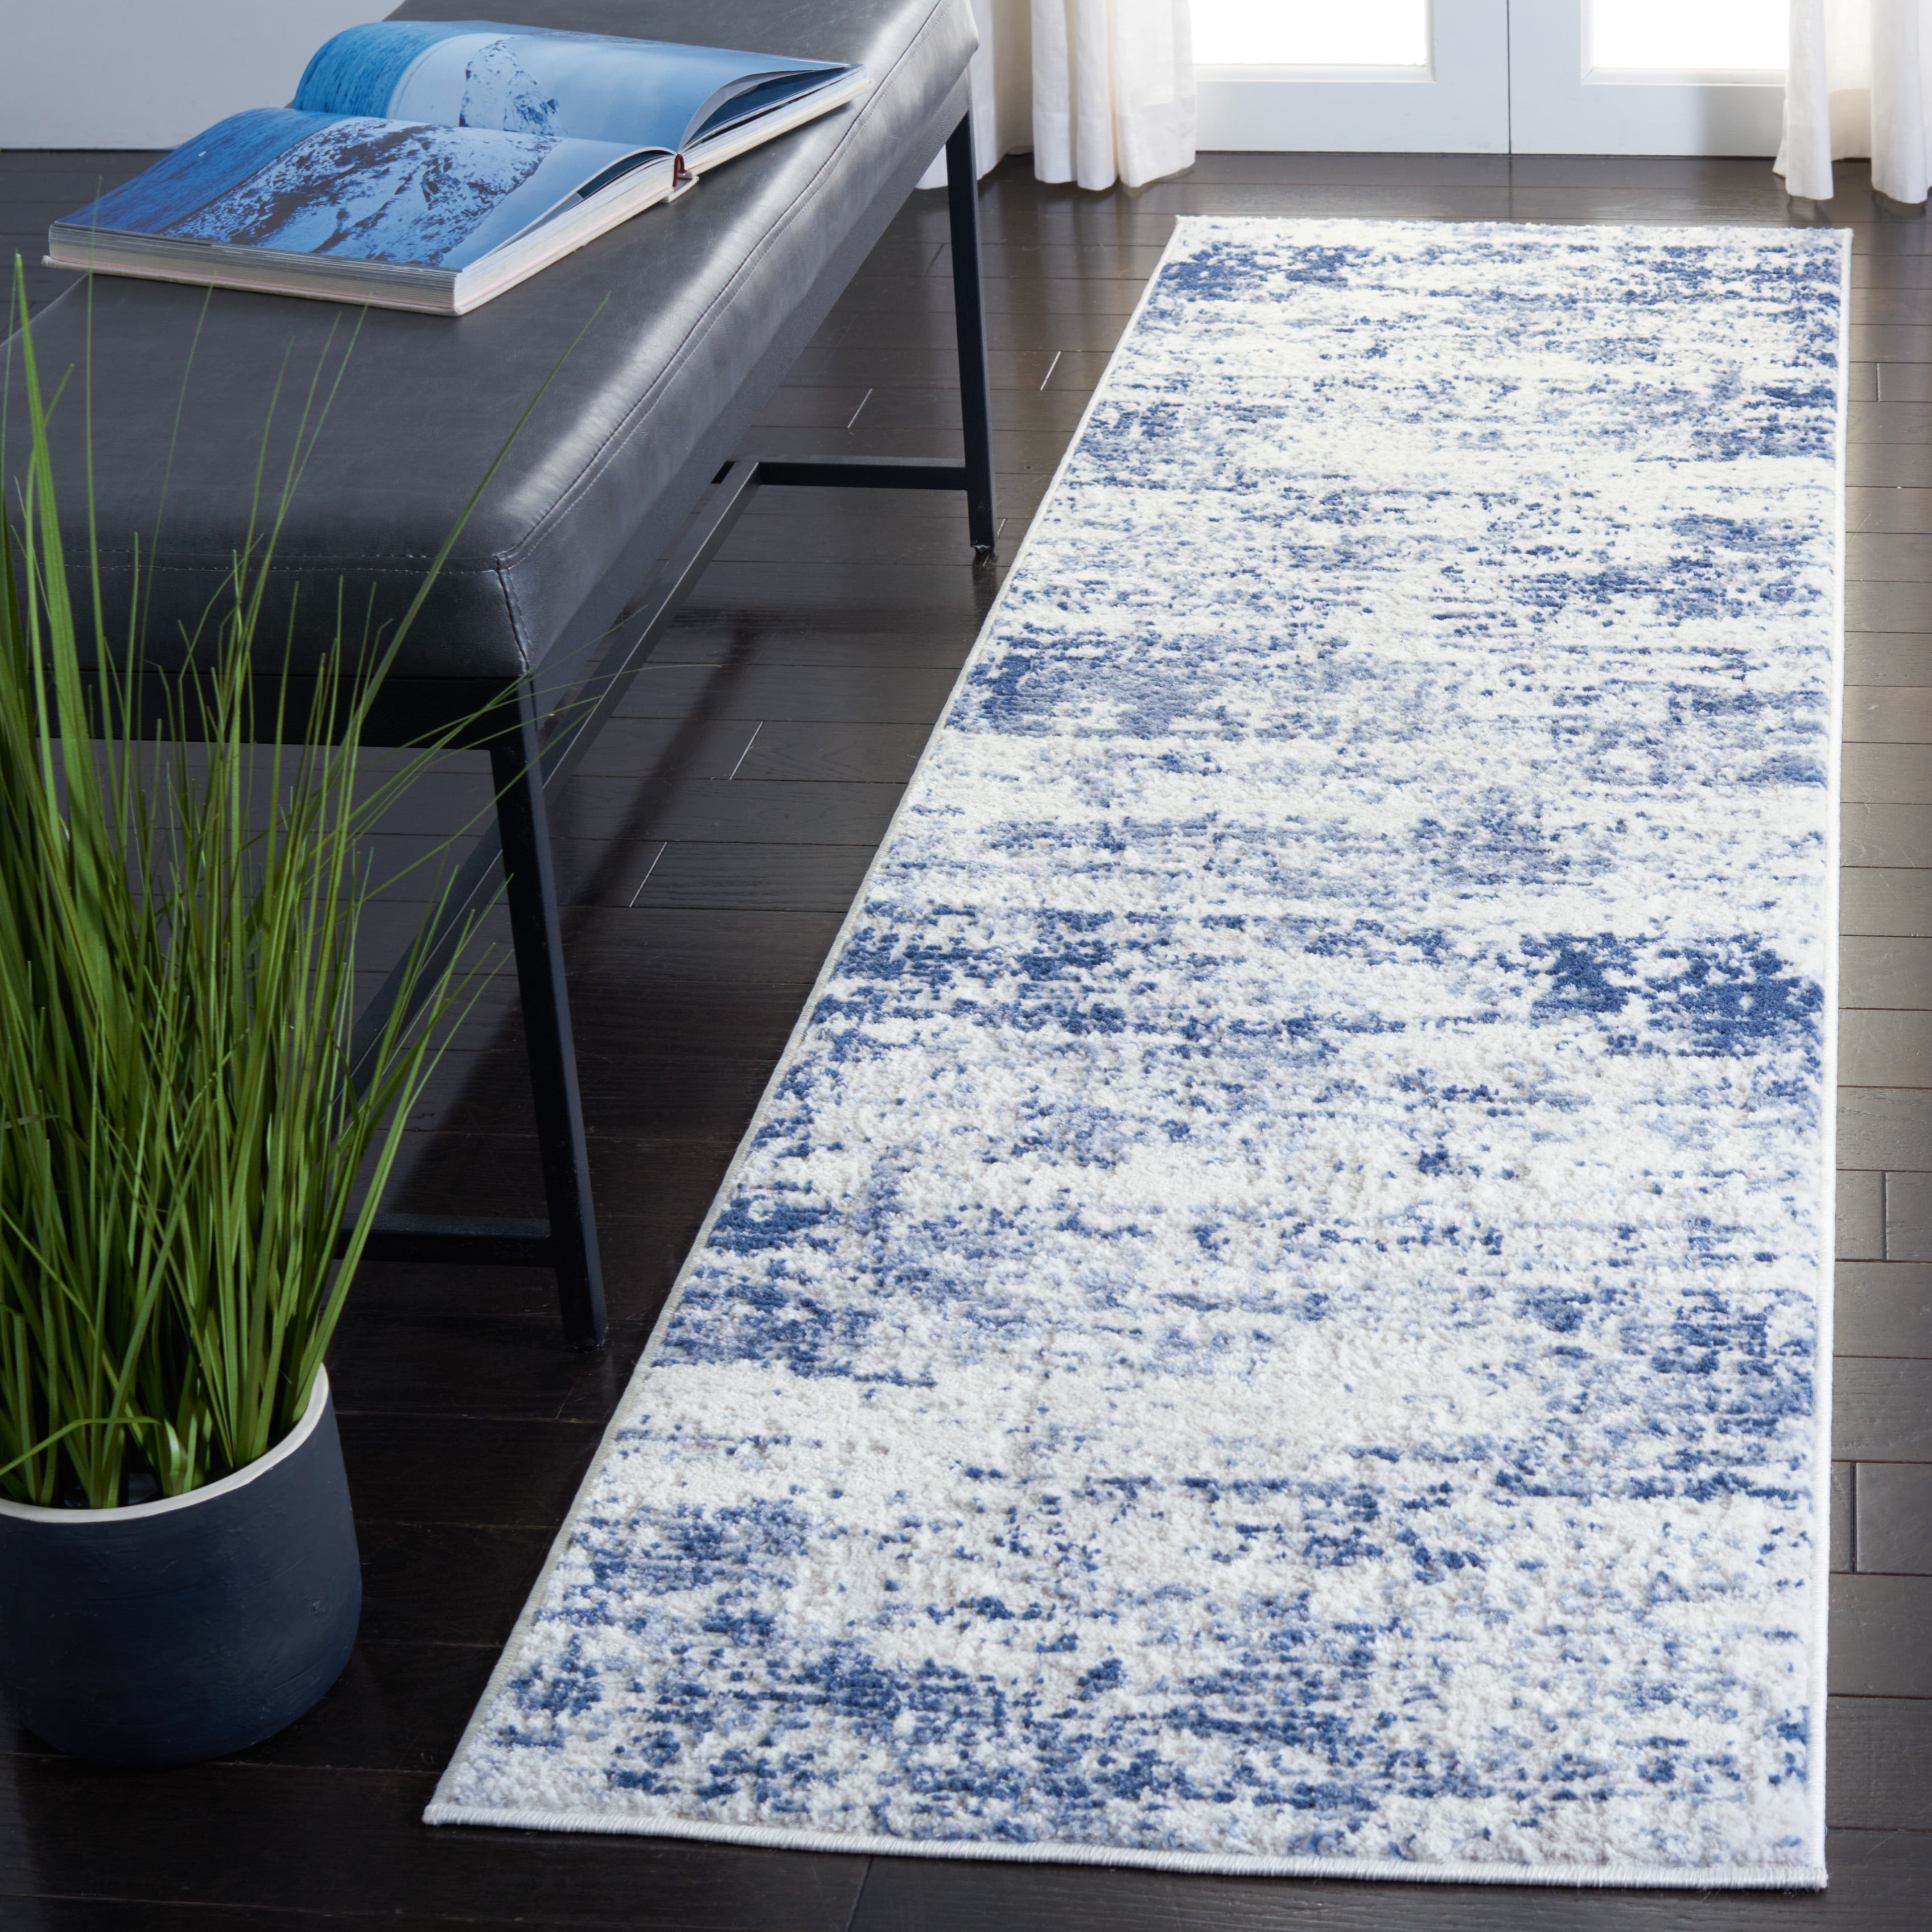 Details about   Navy Silver Thick Rugs for Living Room Abstract Distressed Worn Look Large Small 